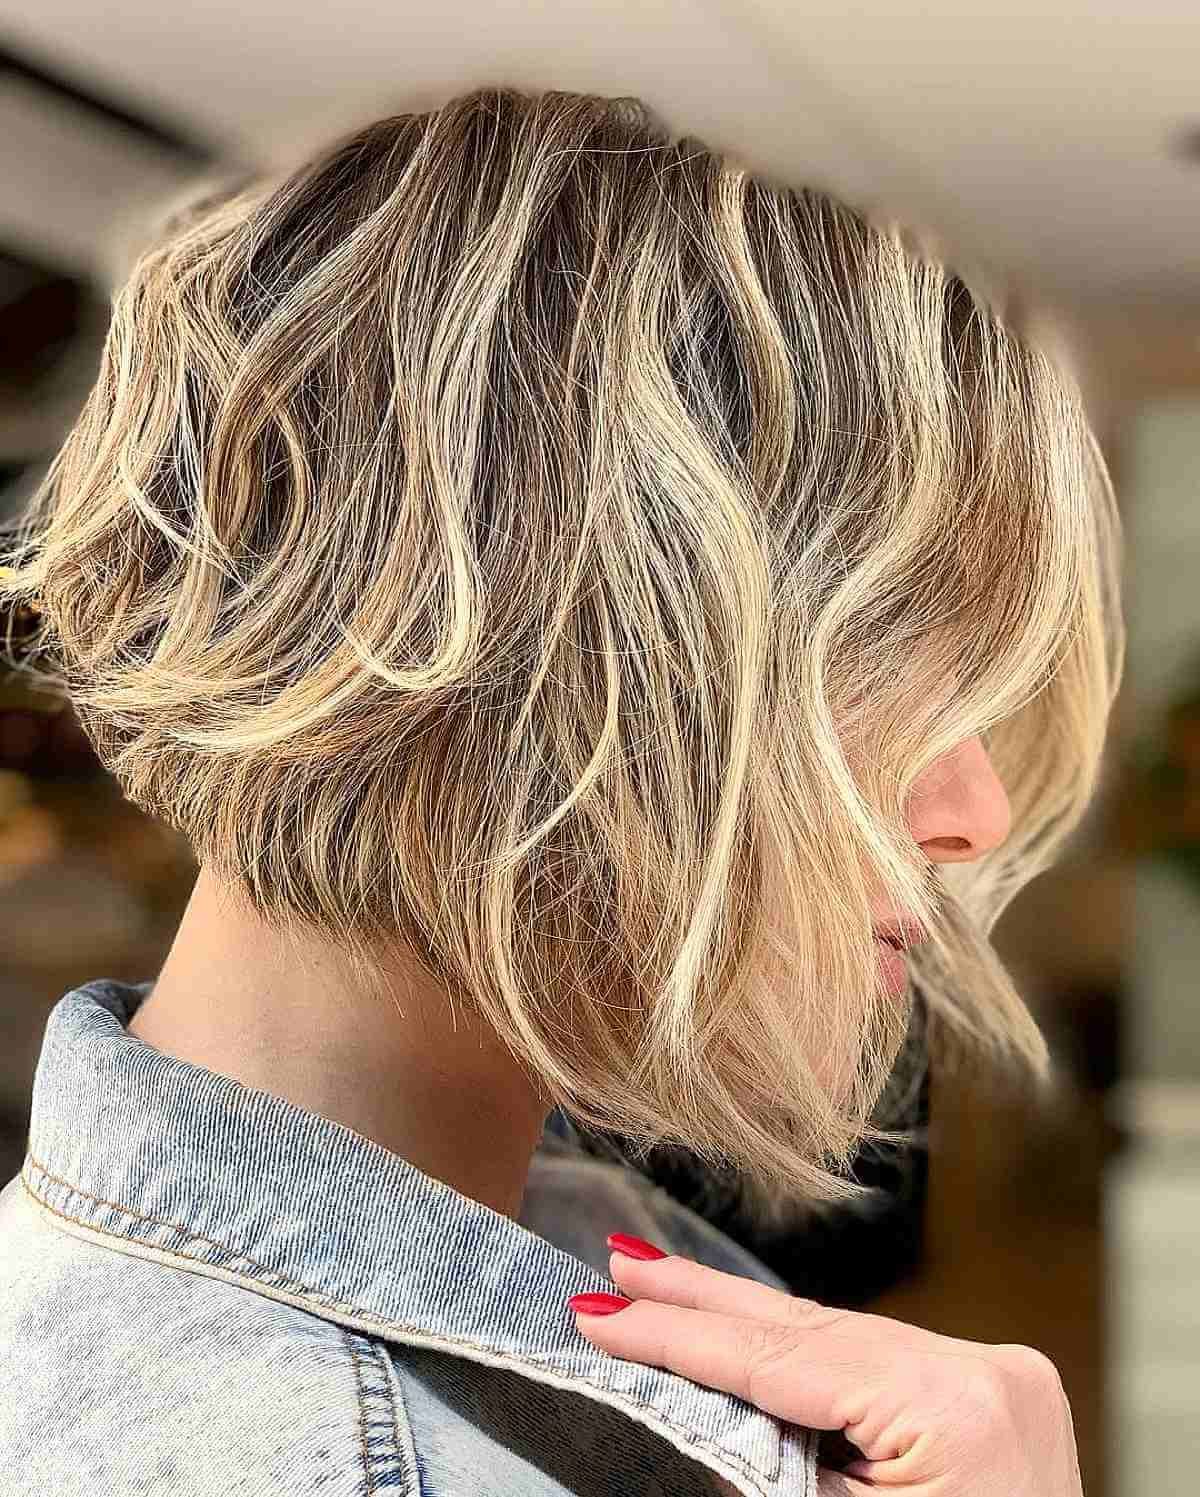 60+ Cutest Short Bob Haircuts You Probably Haven't Seen Yet Regarding Super Volume Short Bob Hairstyles (View 12 of 20)